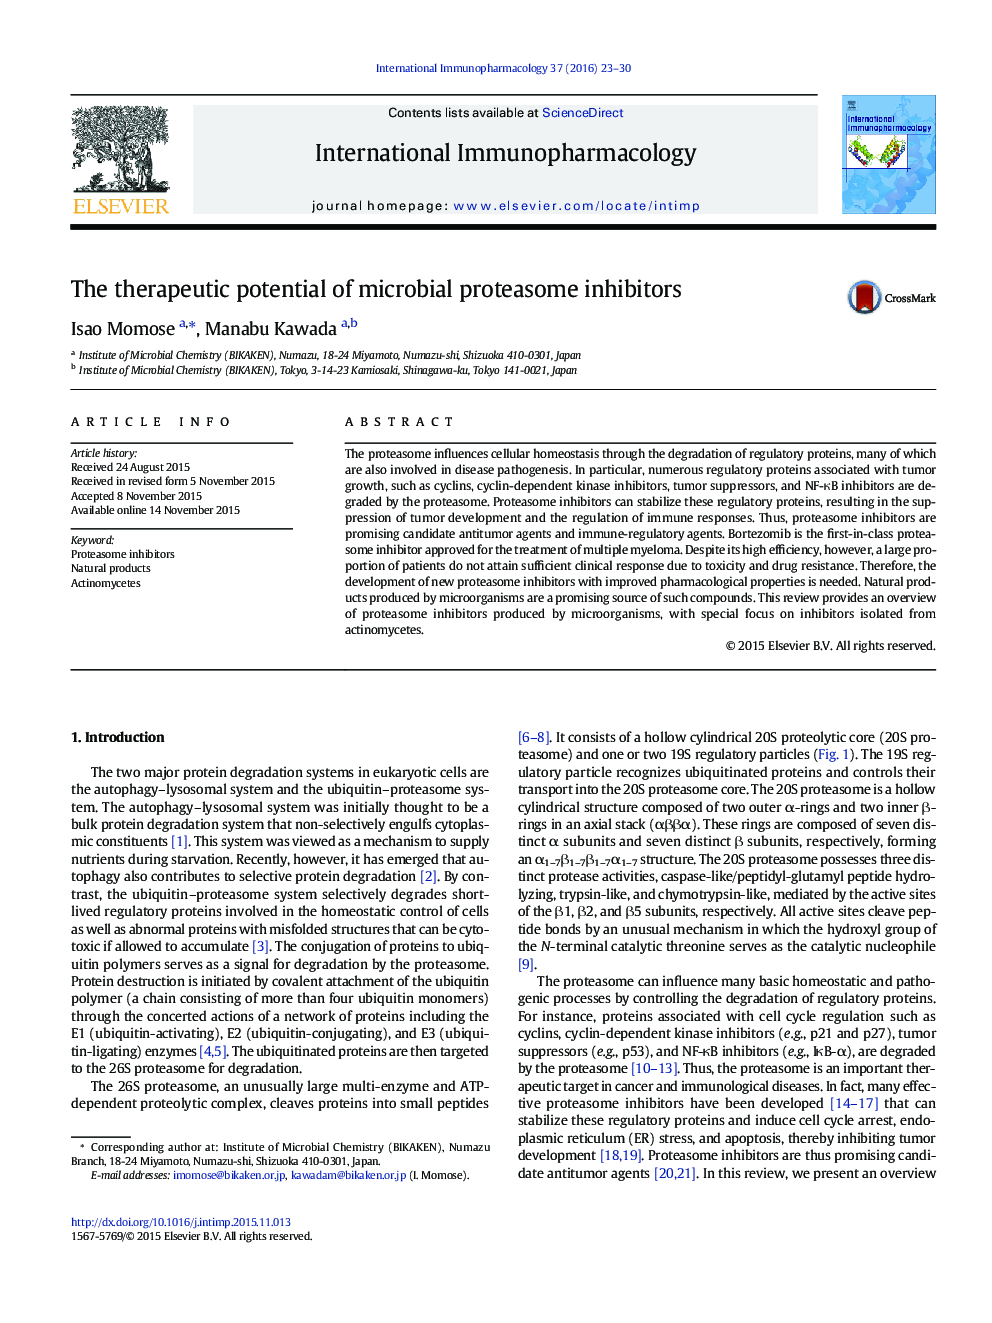 The therapeutic potential of microbial proteasome inhibitors